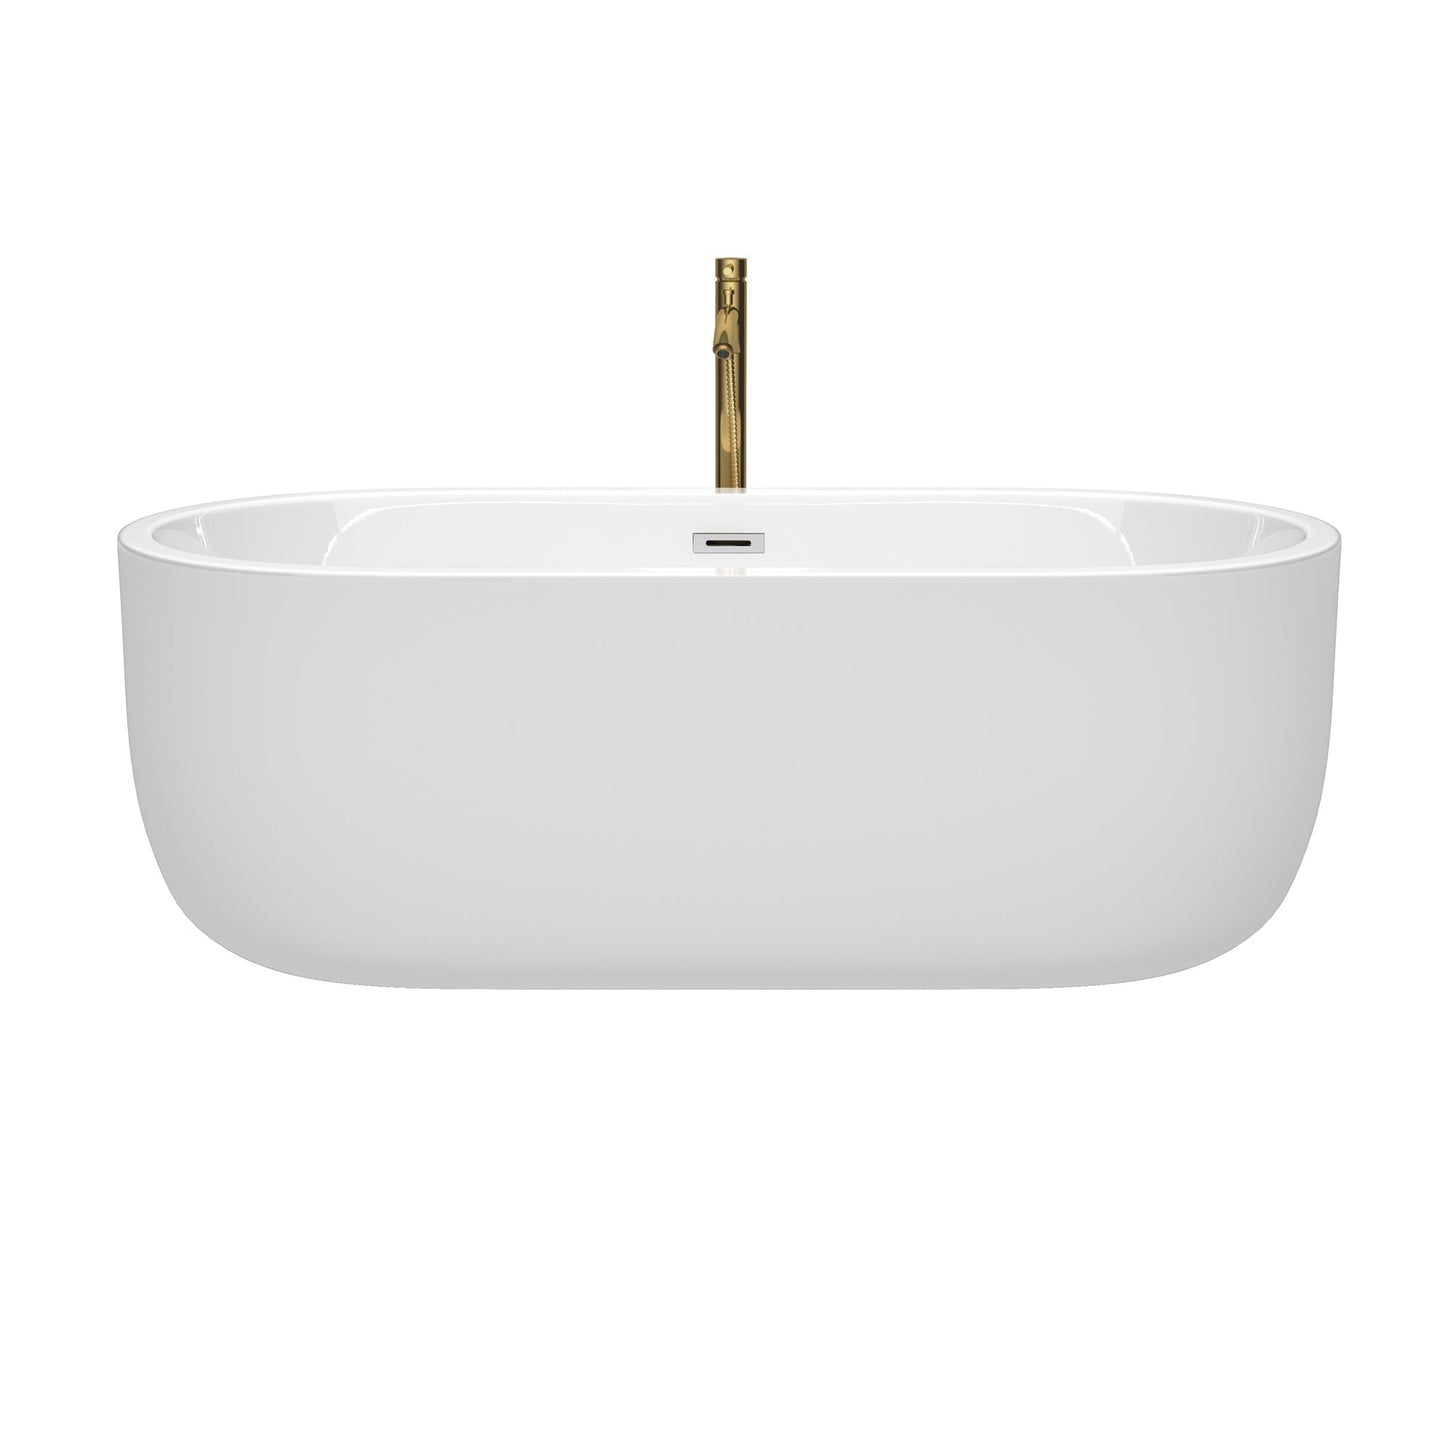 Wyndham Collection Juliette 67" Freestanding Bathtub in White With Polished Chrome Trim and Floor Mounted Faucet in Brushed Gold